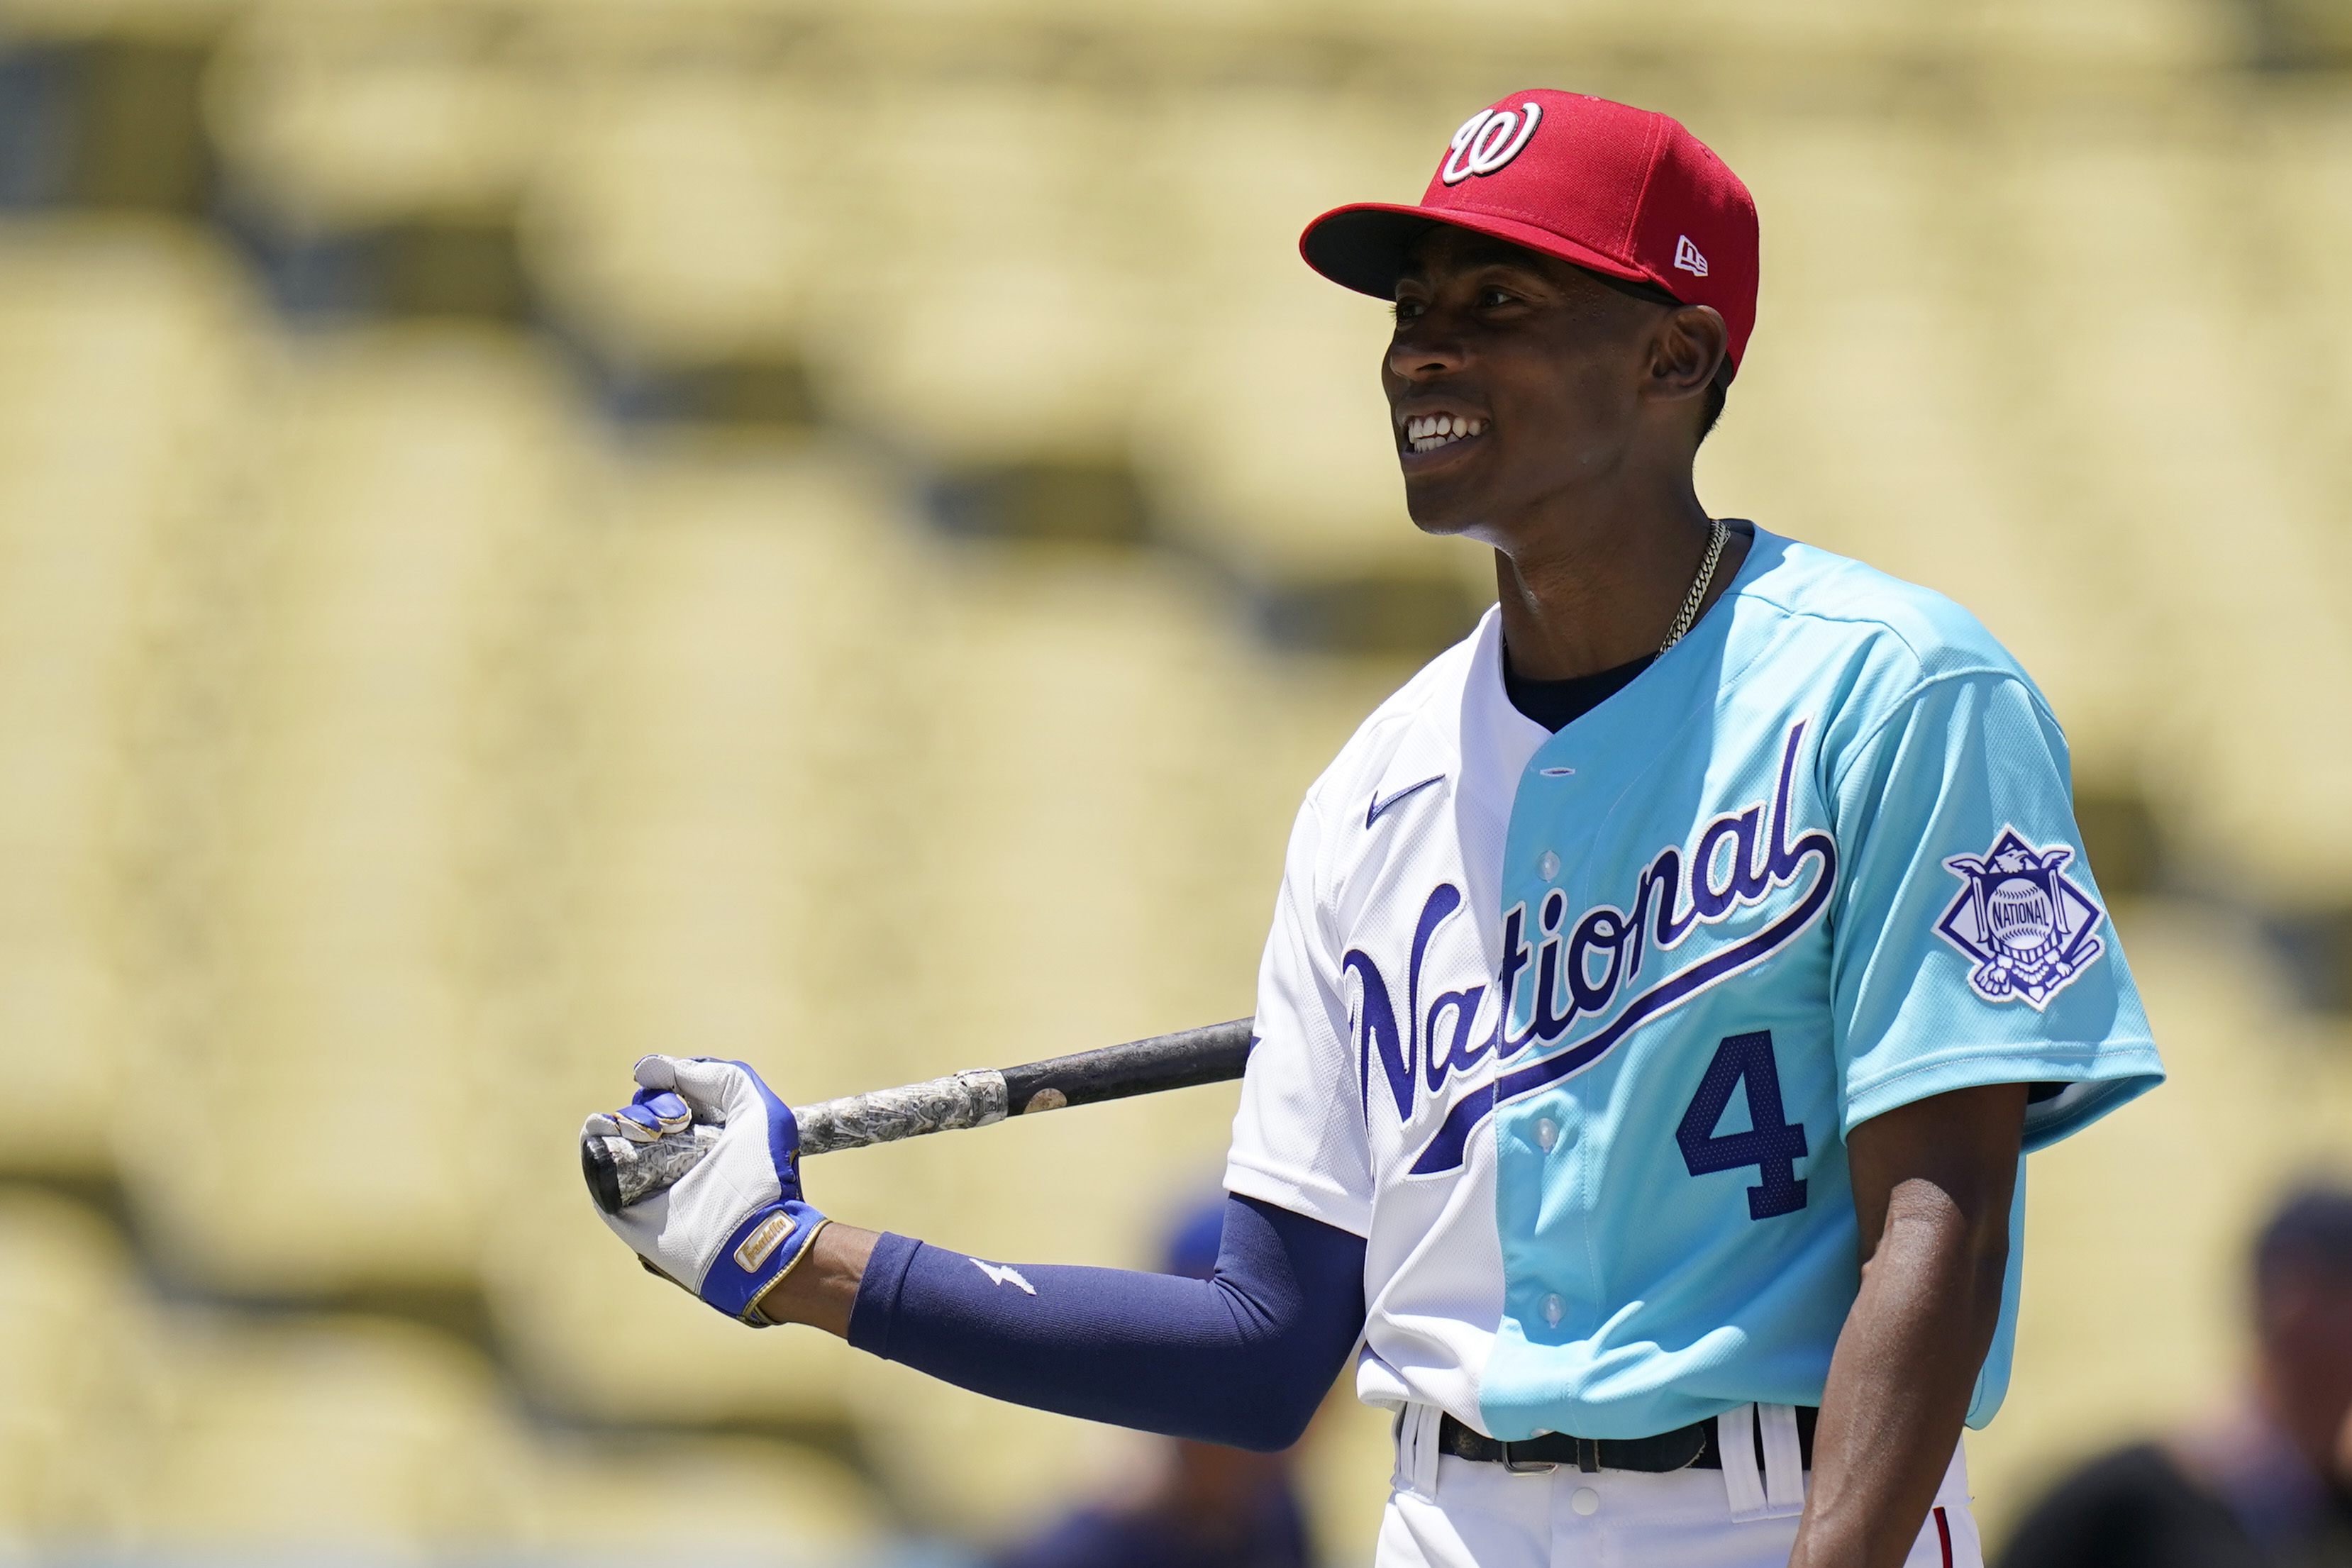 Dusty Baker 'proud' of son Darren for All-Star Futures Game